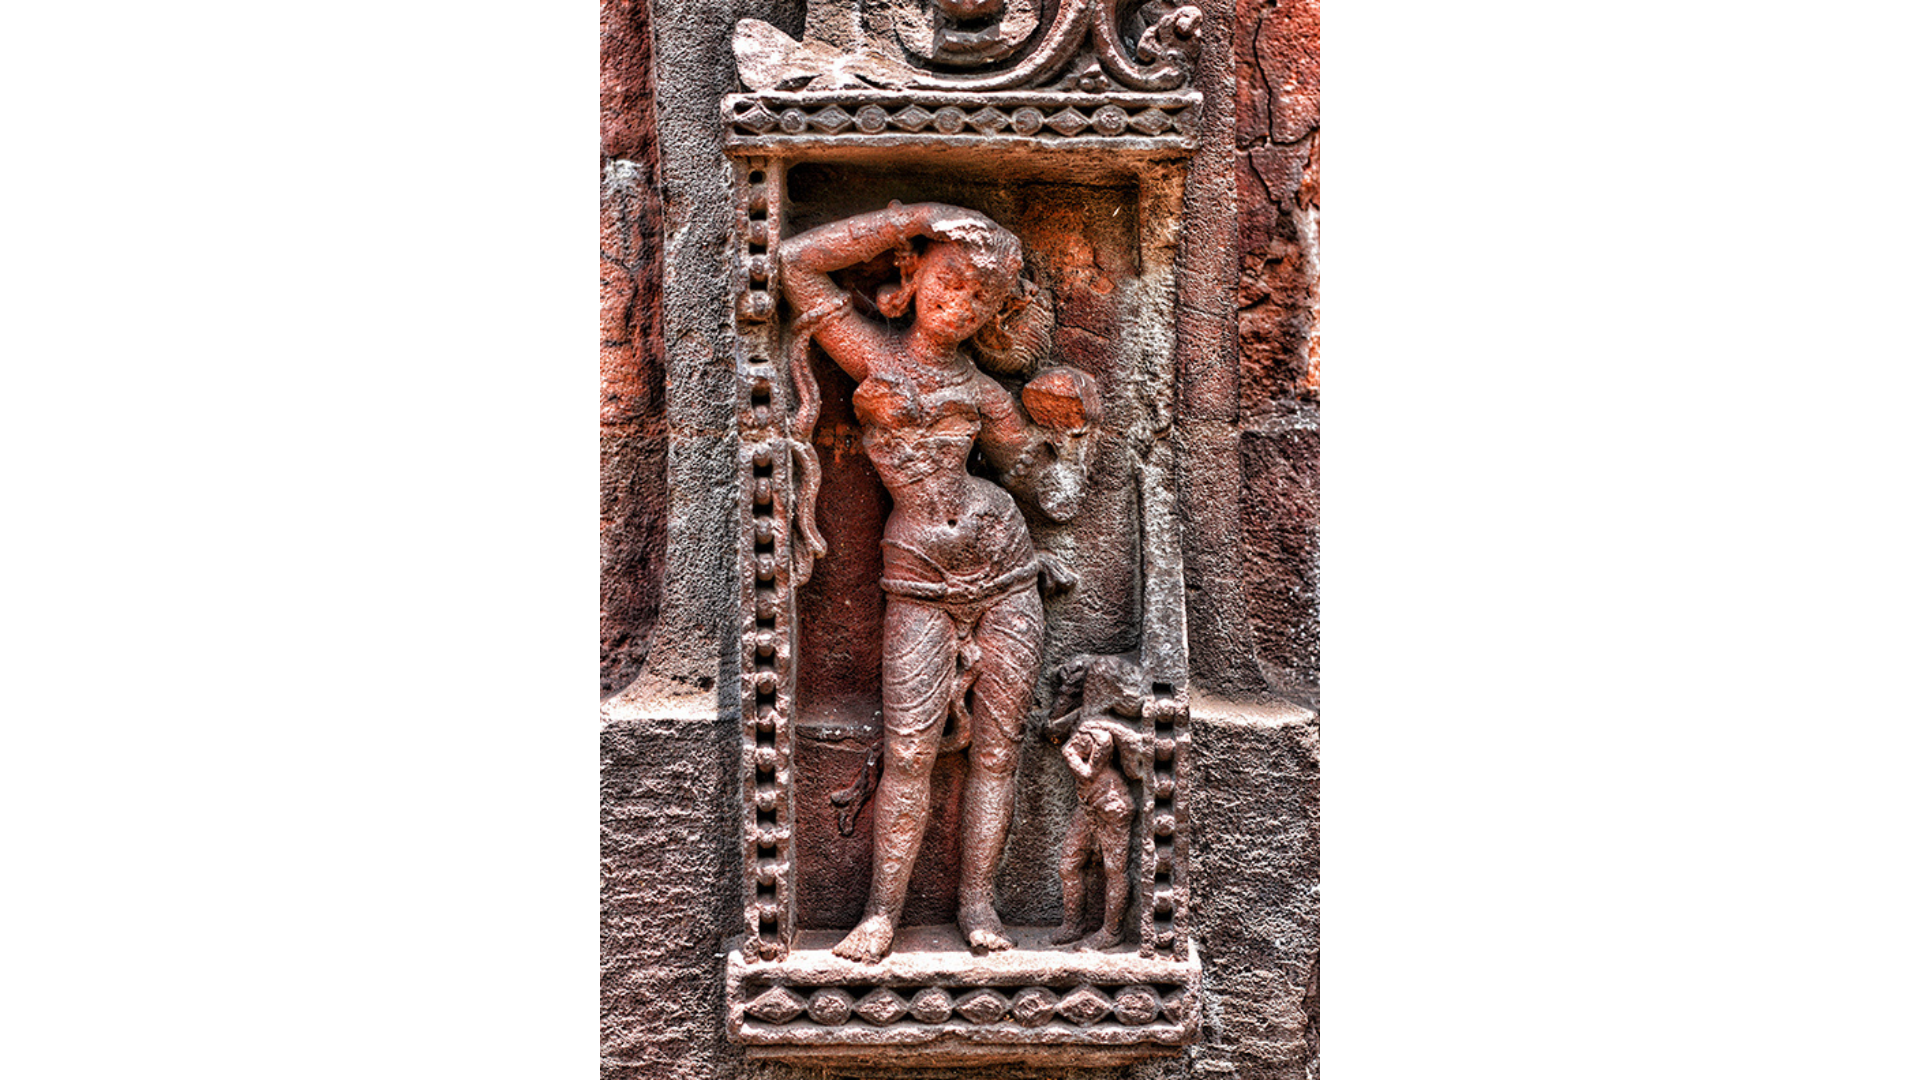 The temple’s walls are adorned with elegant and complex carvings of female figures in various moods